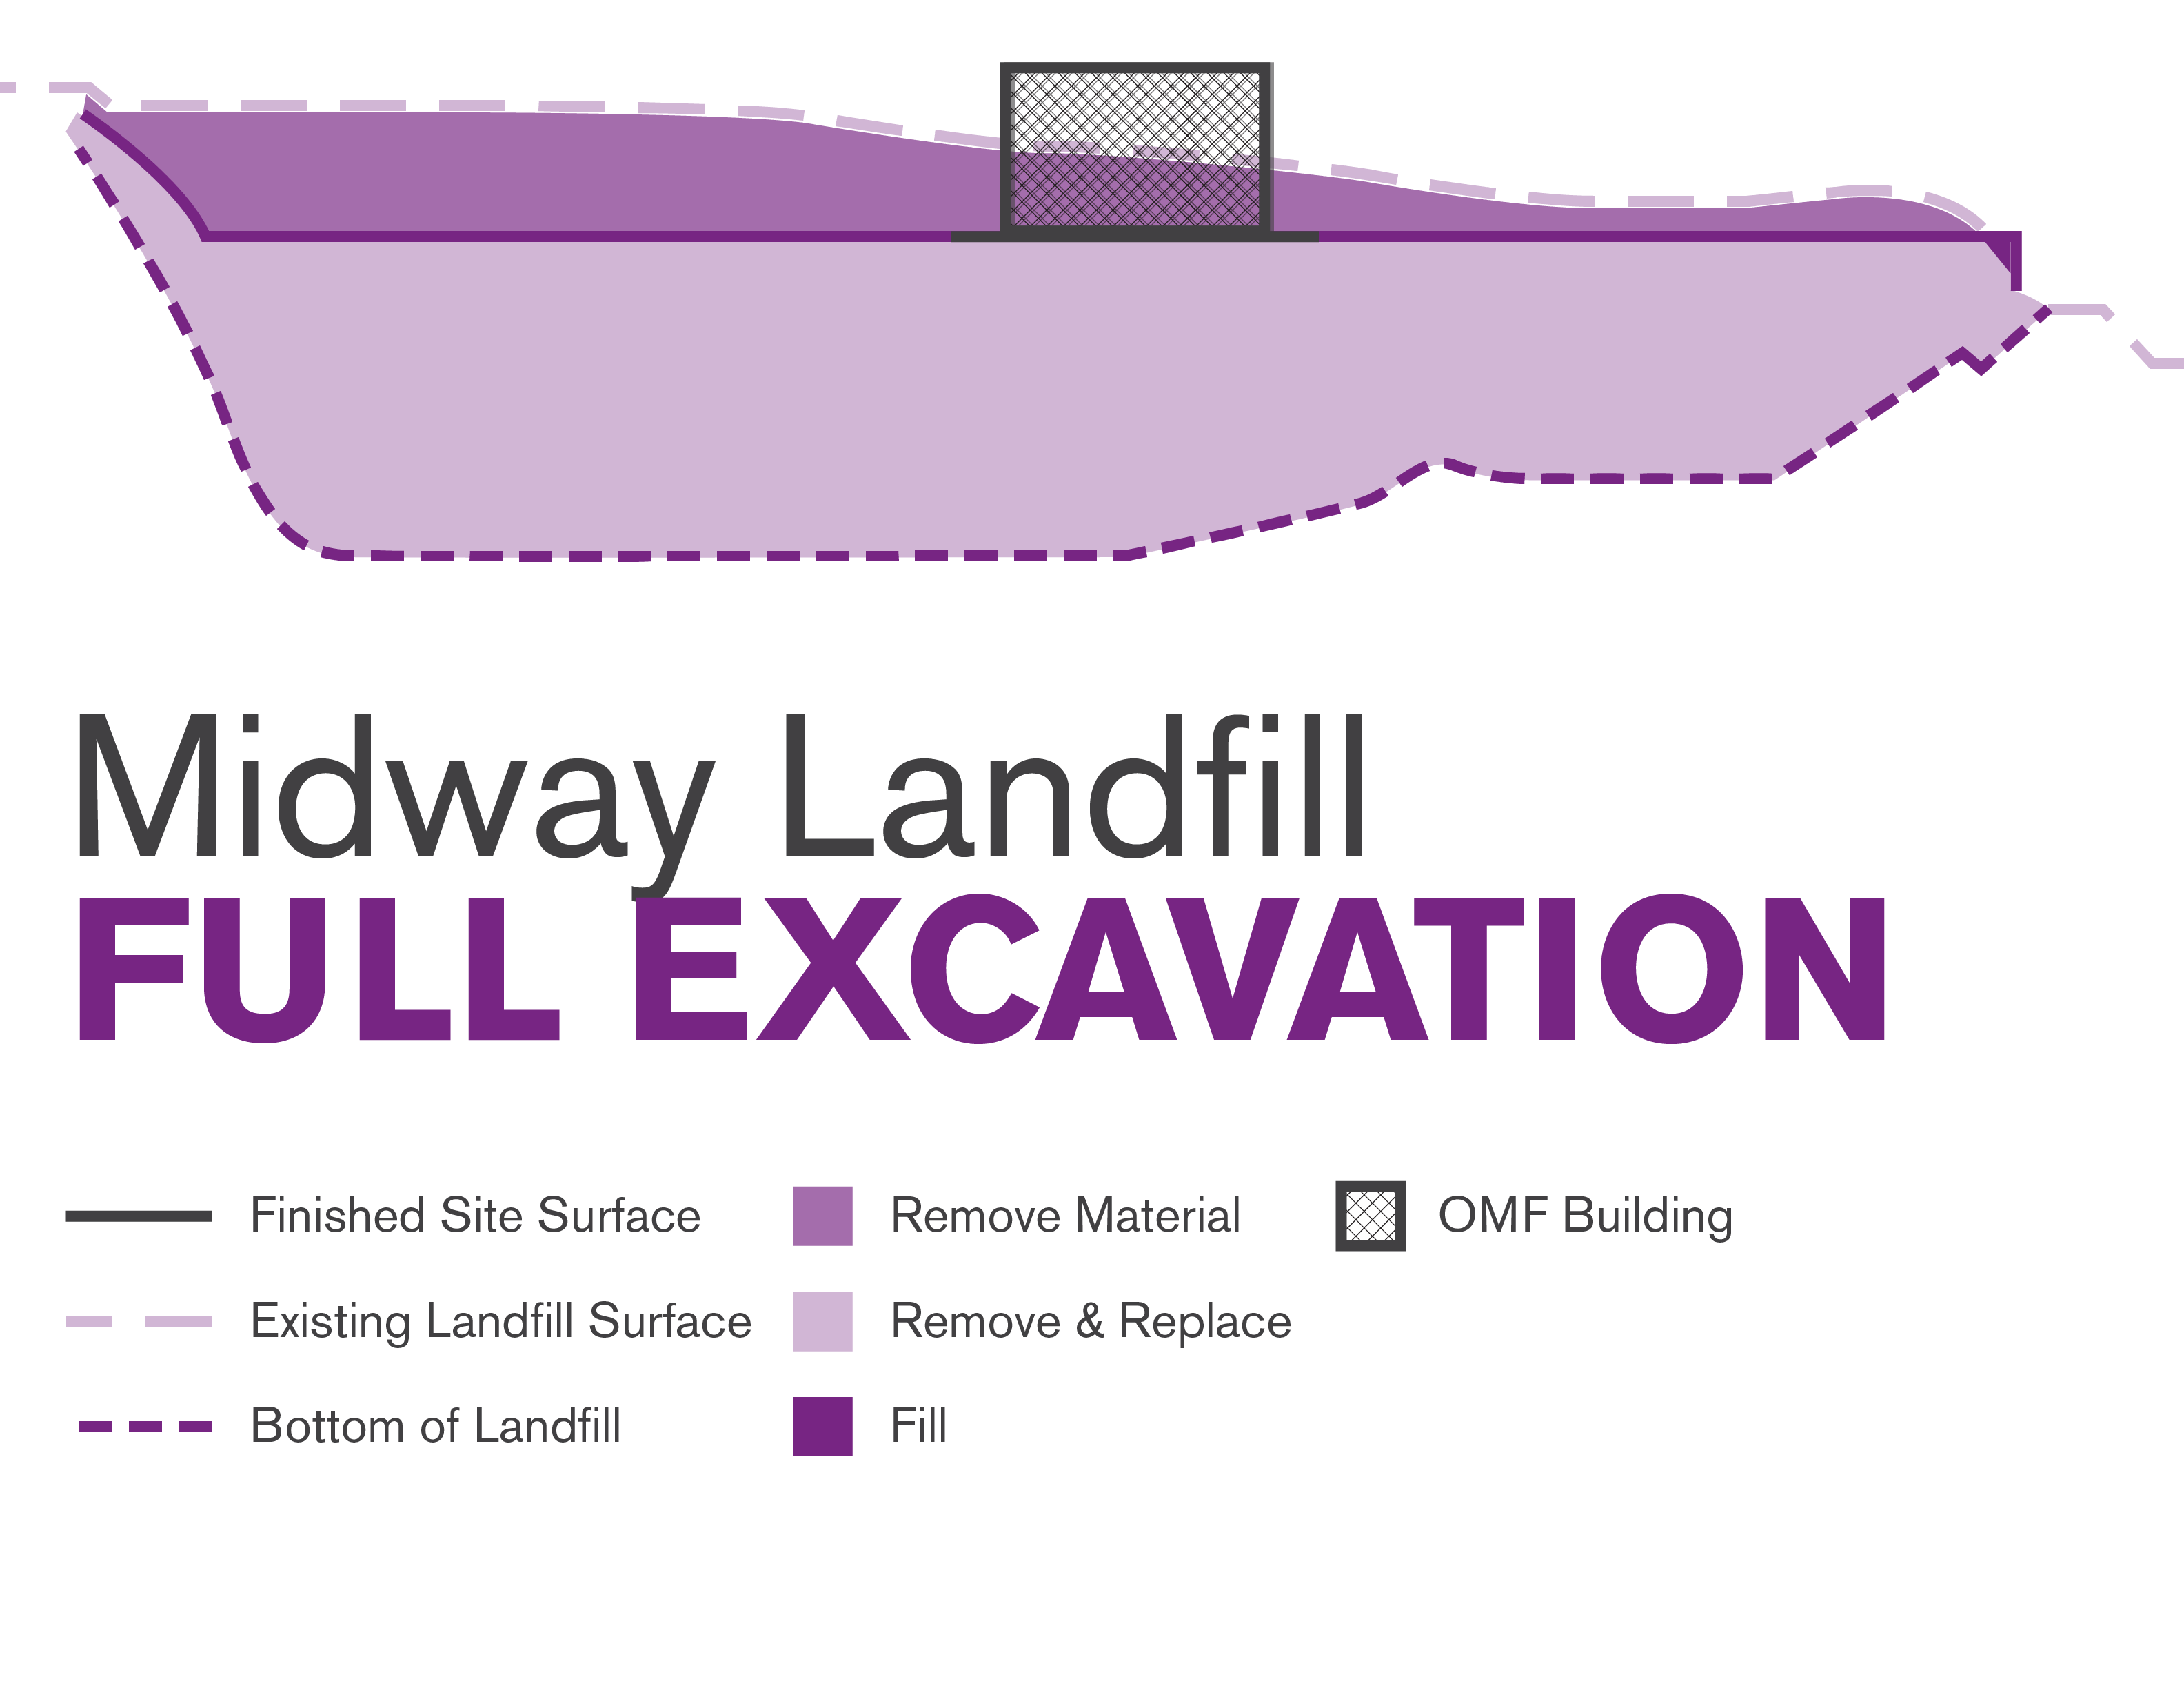 Graphic illustrating the Midway Landfill Full Excavation construction method.